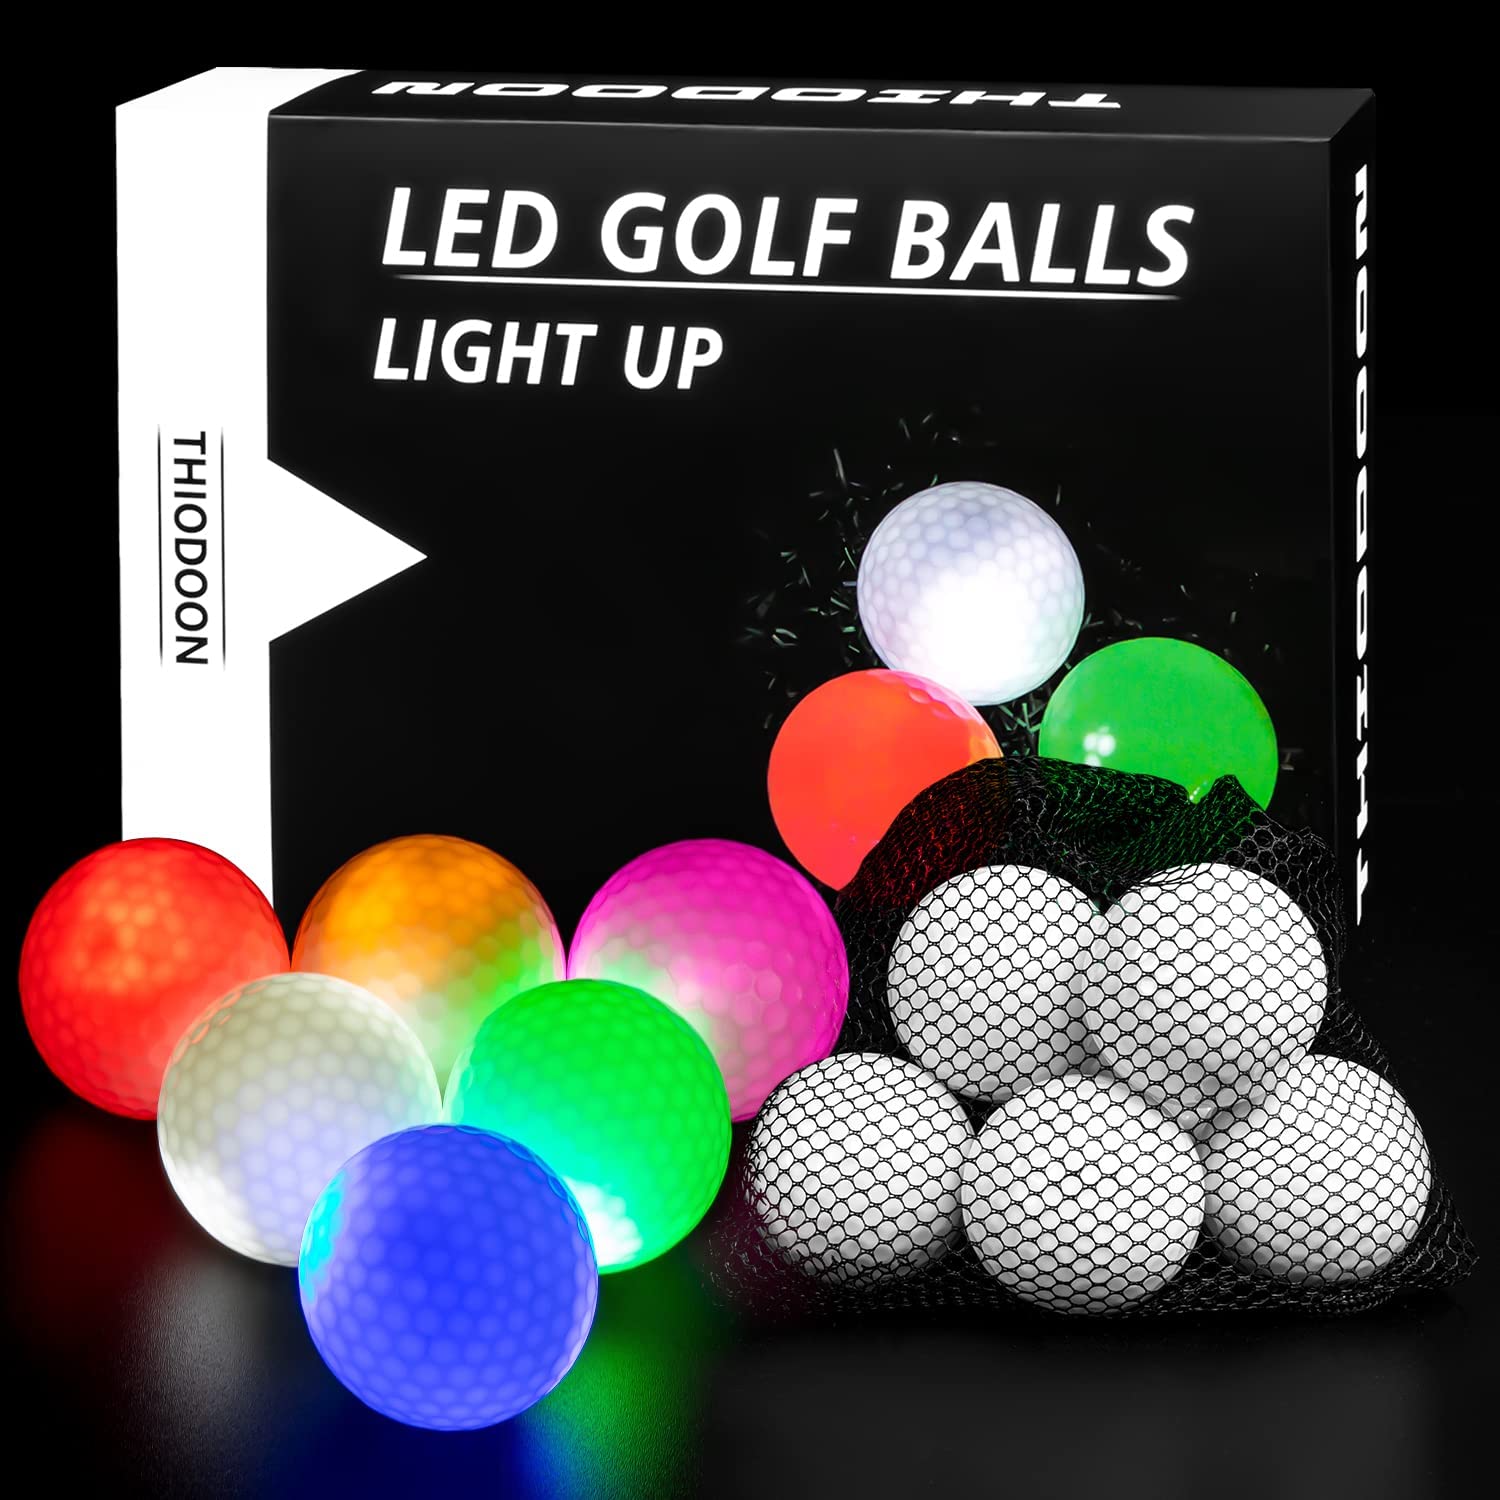 THIODOON Glow in The Dark Golf Balls Light up Led Golf Balls Night Golf Gift Sets for Men Kids Women 6 Pack (6 Colors in one) - image 1 of 7